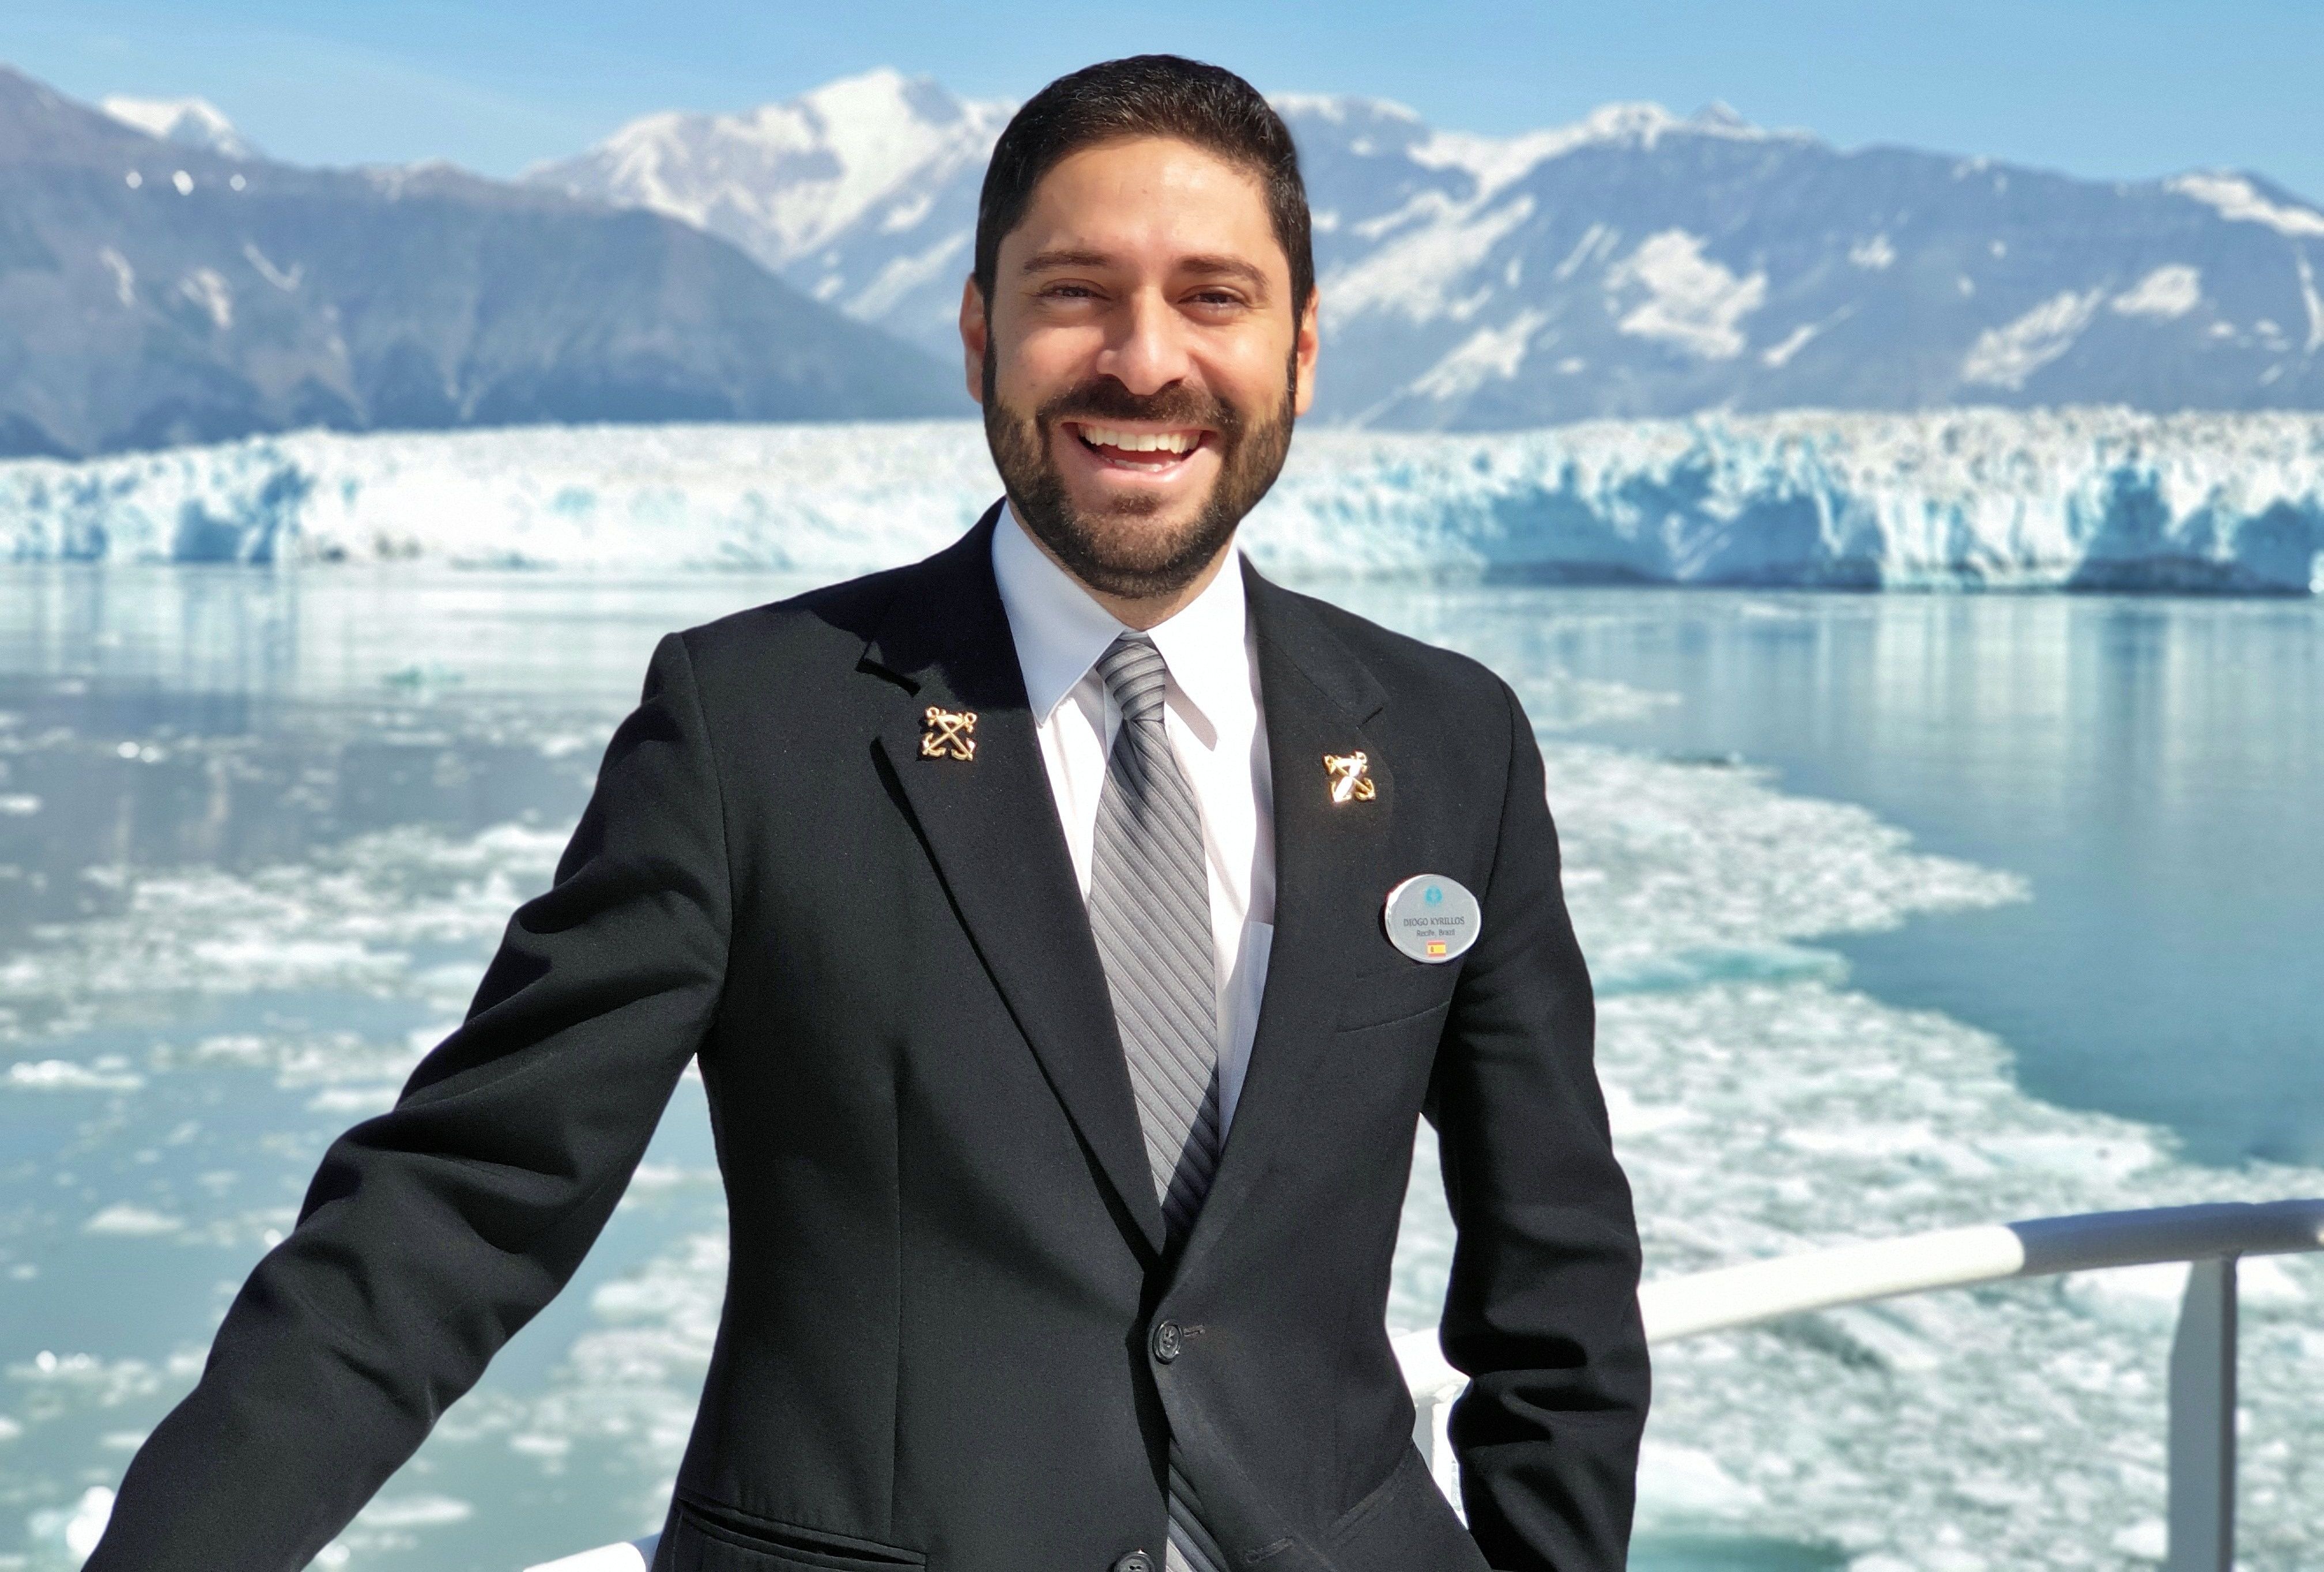 Icebreaker: Diogo believes being well-travelled helps him connect with guests. He has visited many places with Crystal, including Alaska (pictured)